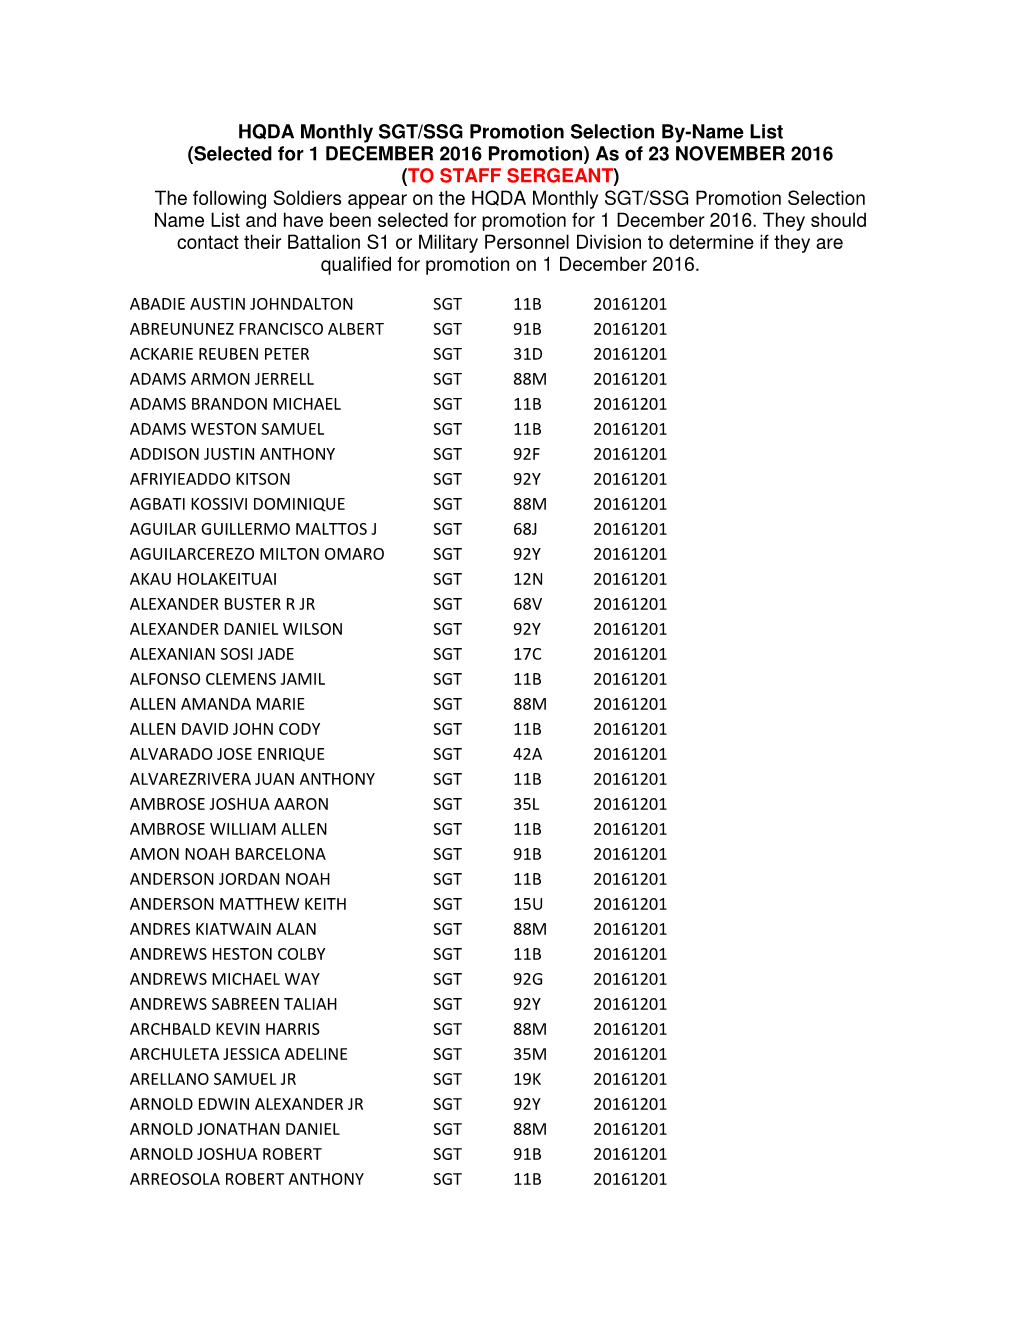 HQDA Monthly SGT/SSG Promotion Selection ByName List DocsLib